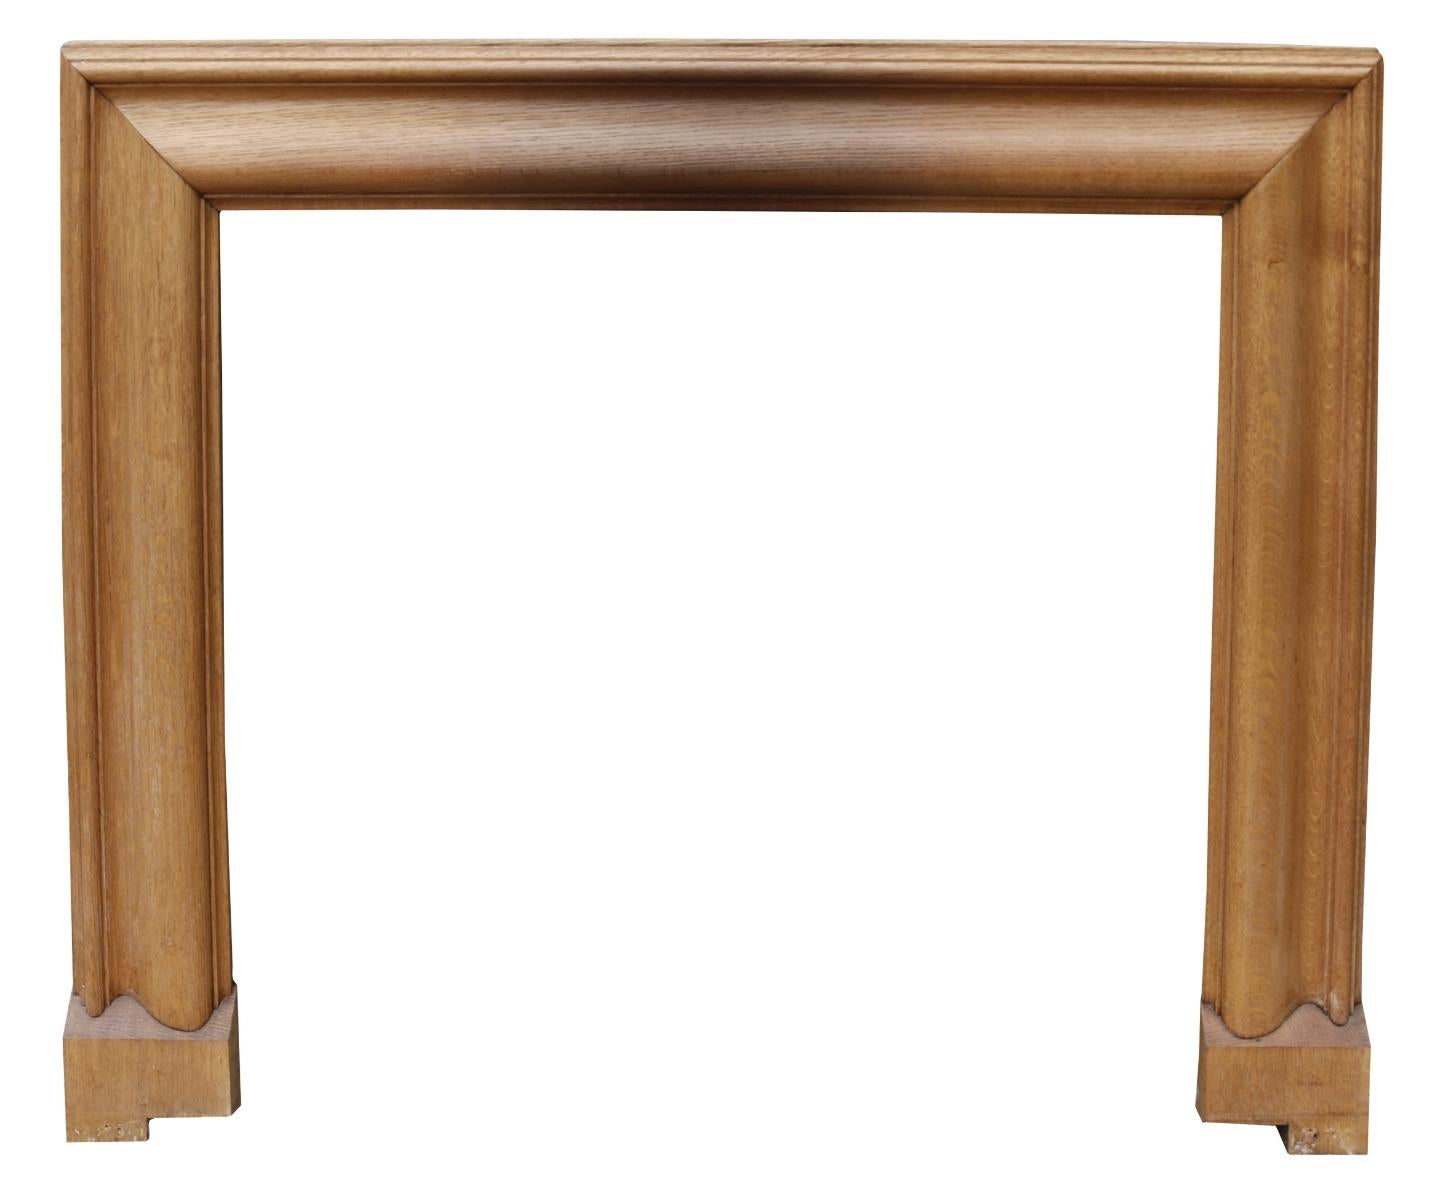 An elegant surround, reclaimed from a house in Yorkshire.

Additional dimensions:

Opening height 100.5 cm

Opening width 106 cm

Width between outsides of the foot blocks 141.5 cm.